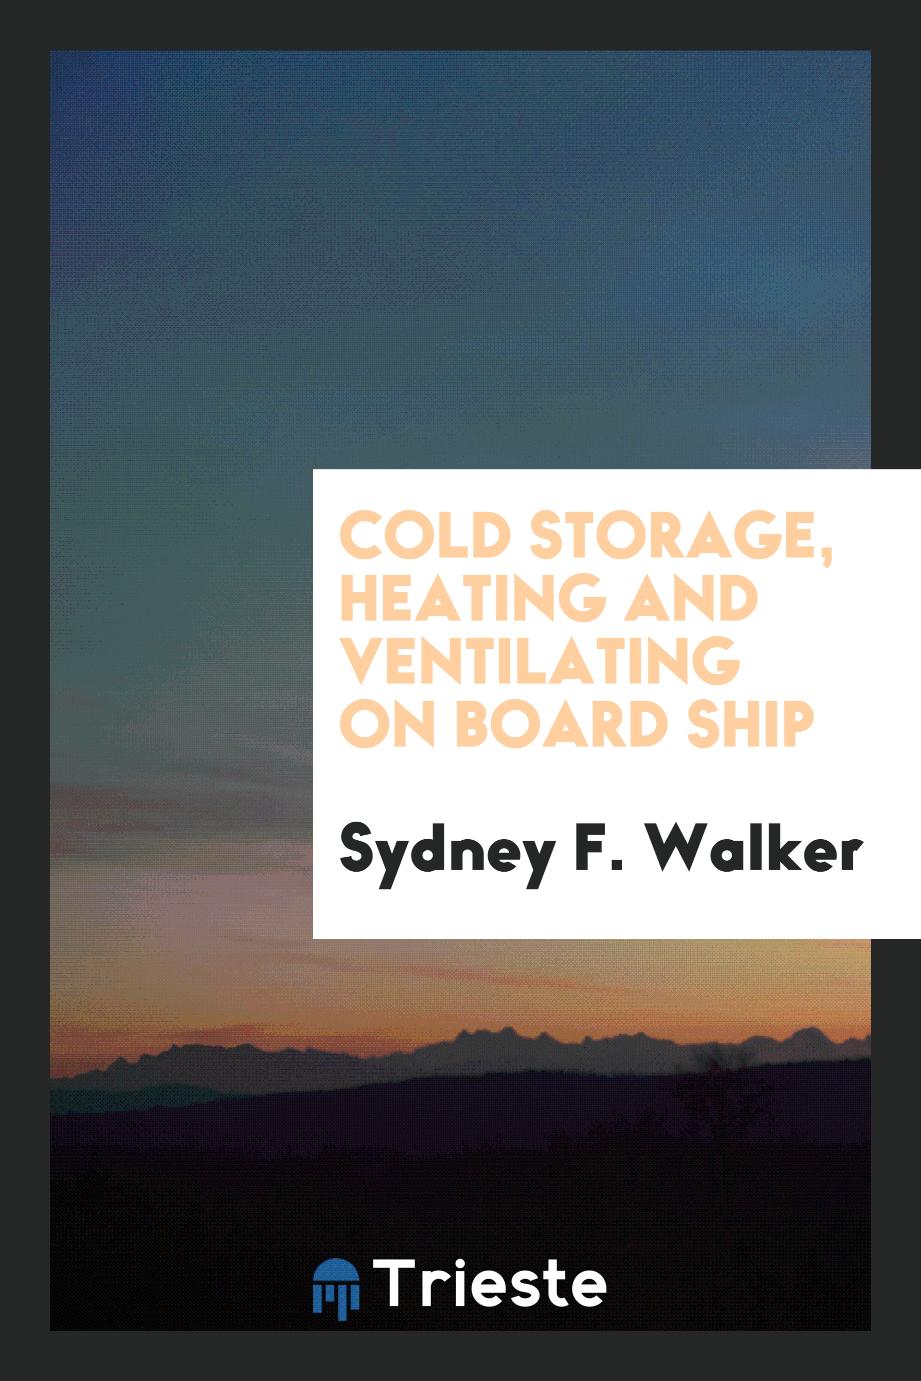 Cold storage, heating and ventilating on board ship